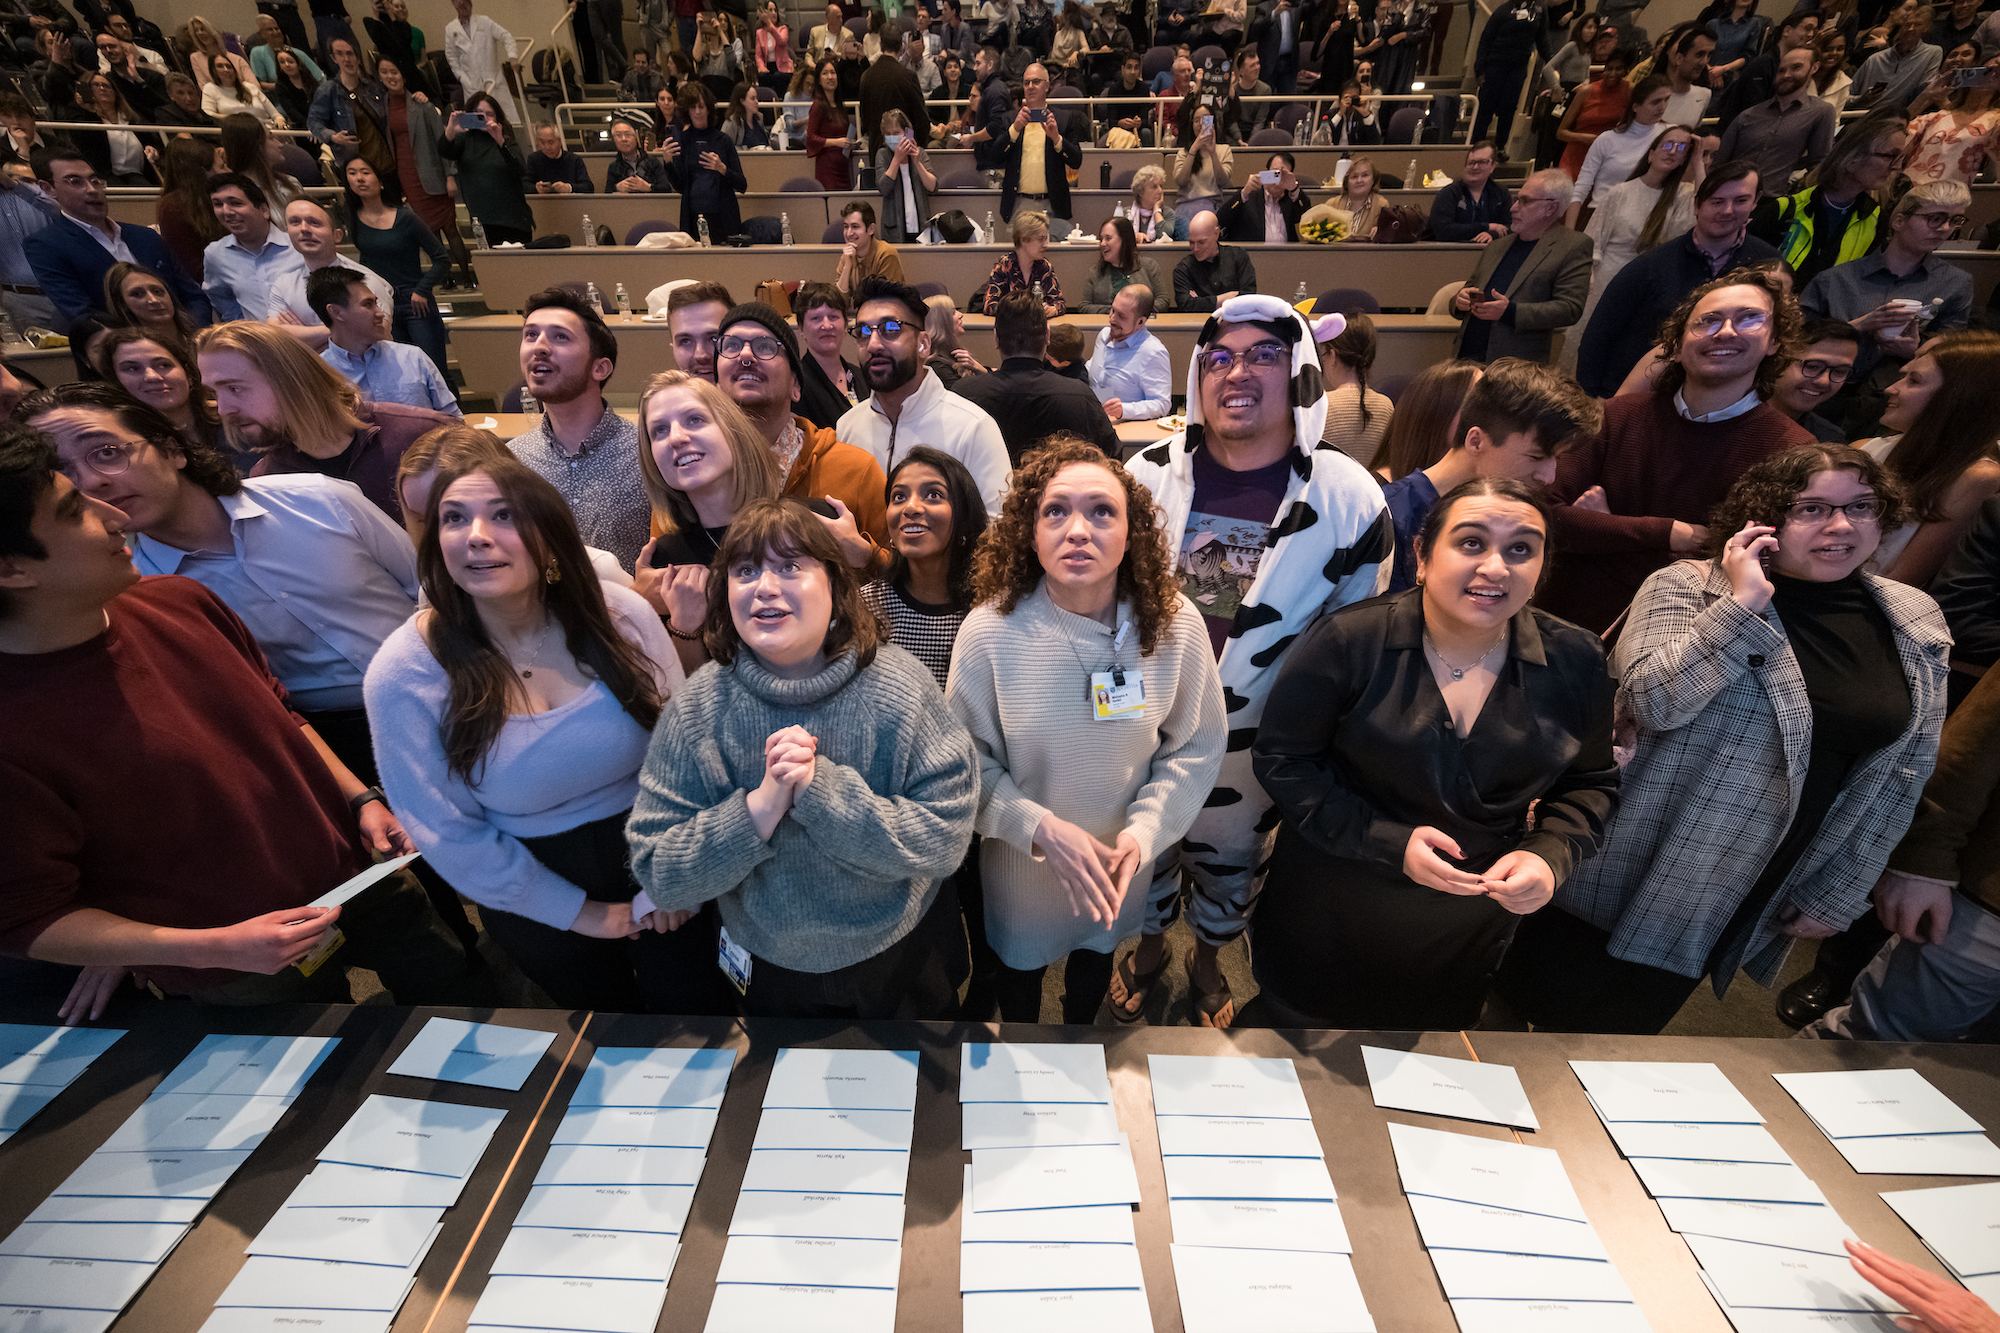 A roomful of students stands anxiously behind a table with white envelopes